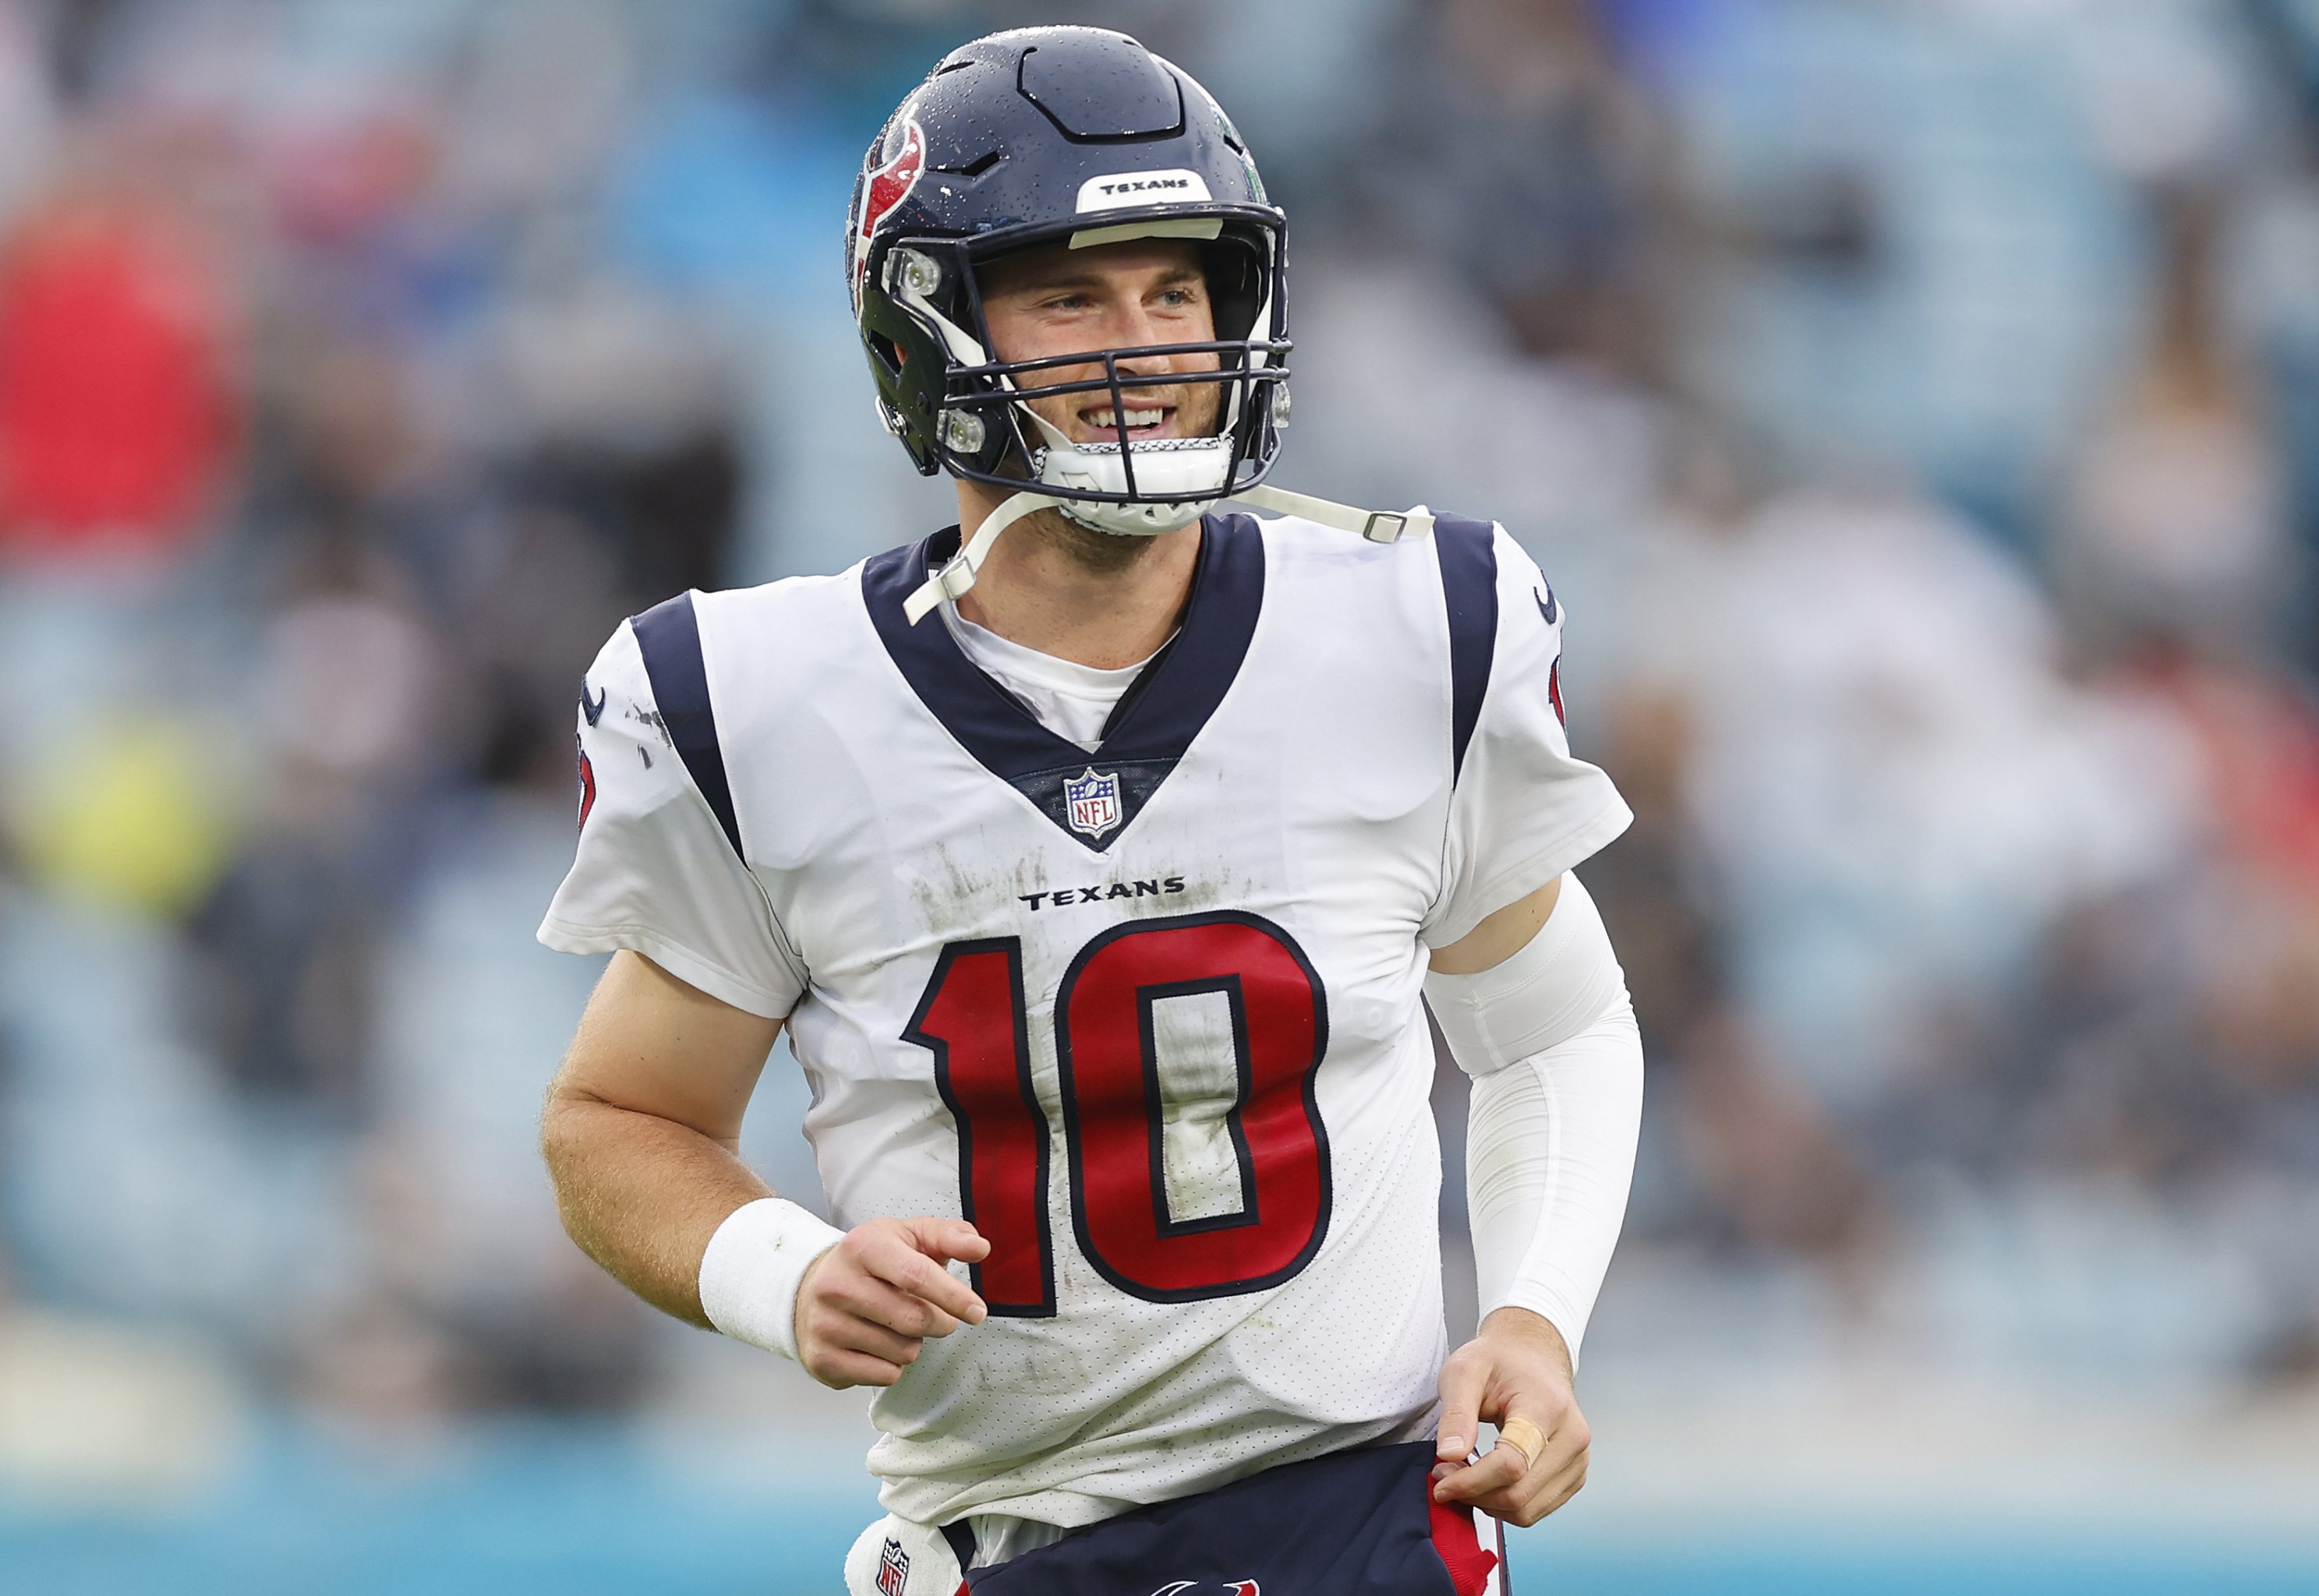 With Davis Mills Cruising, Texans Should Not Look for a QB in 2022